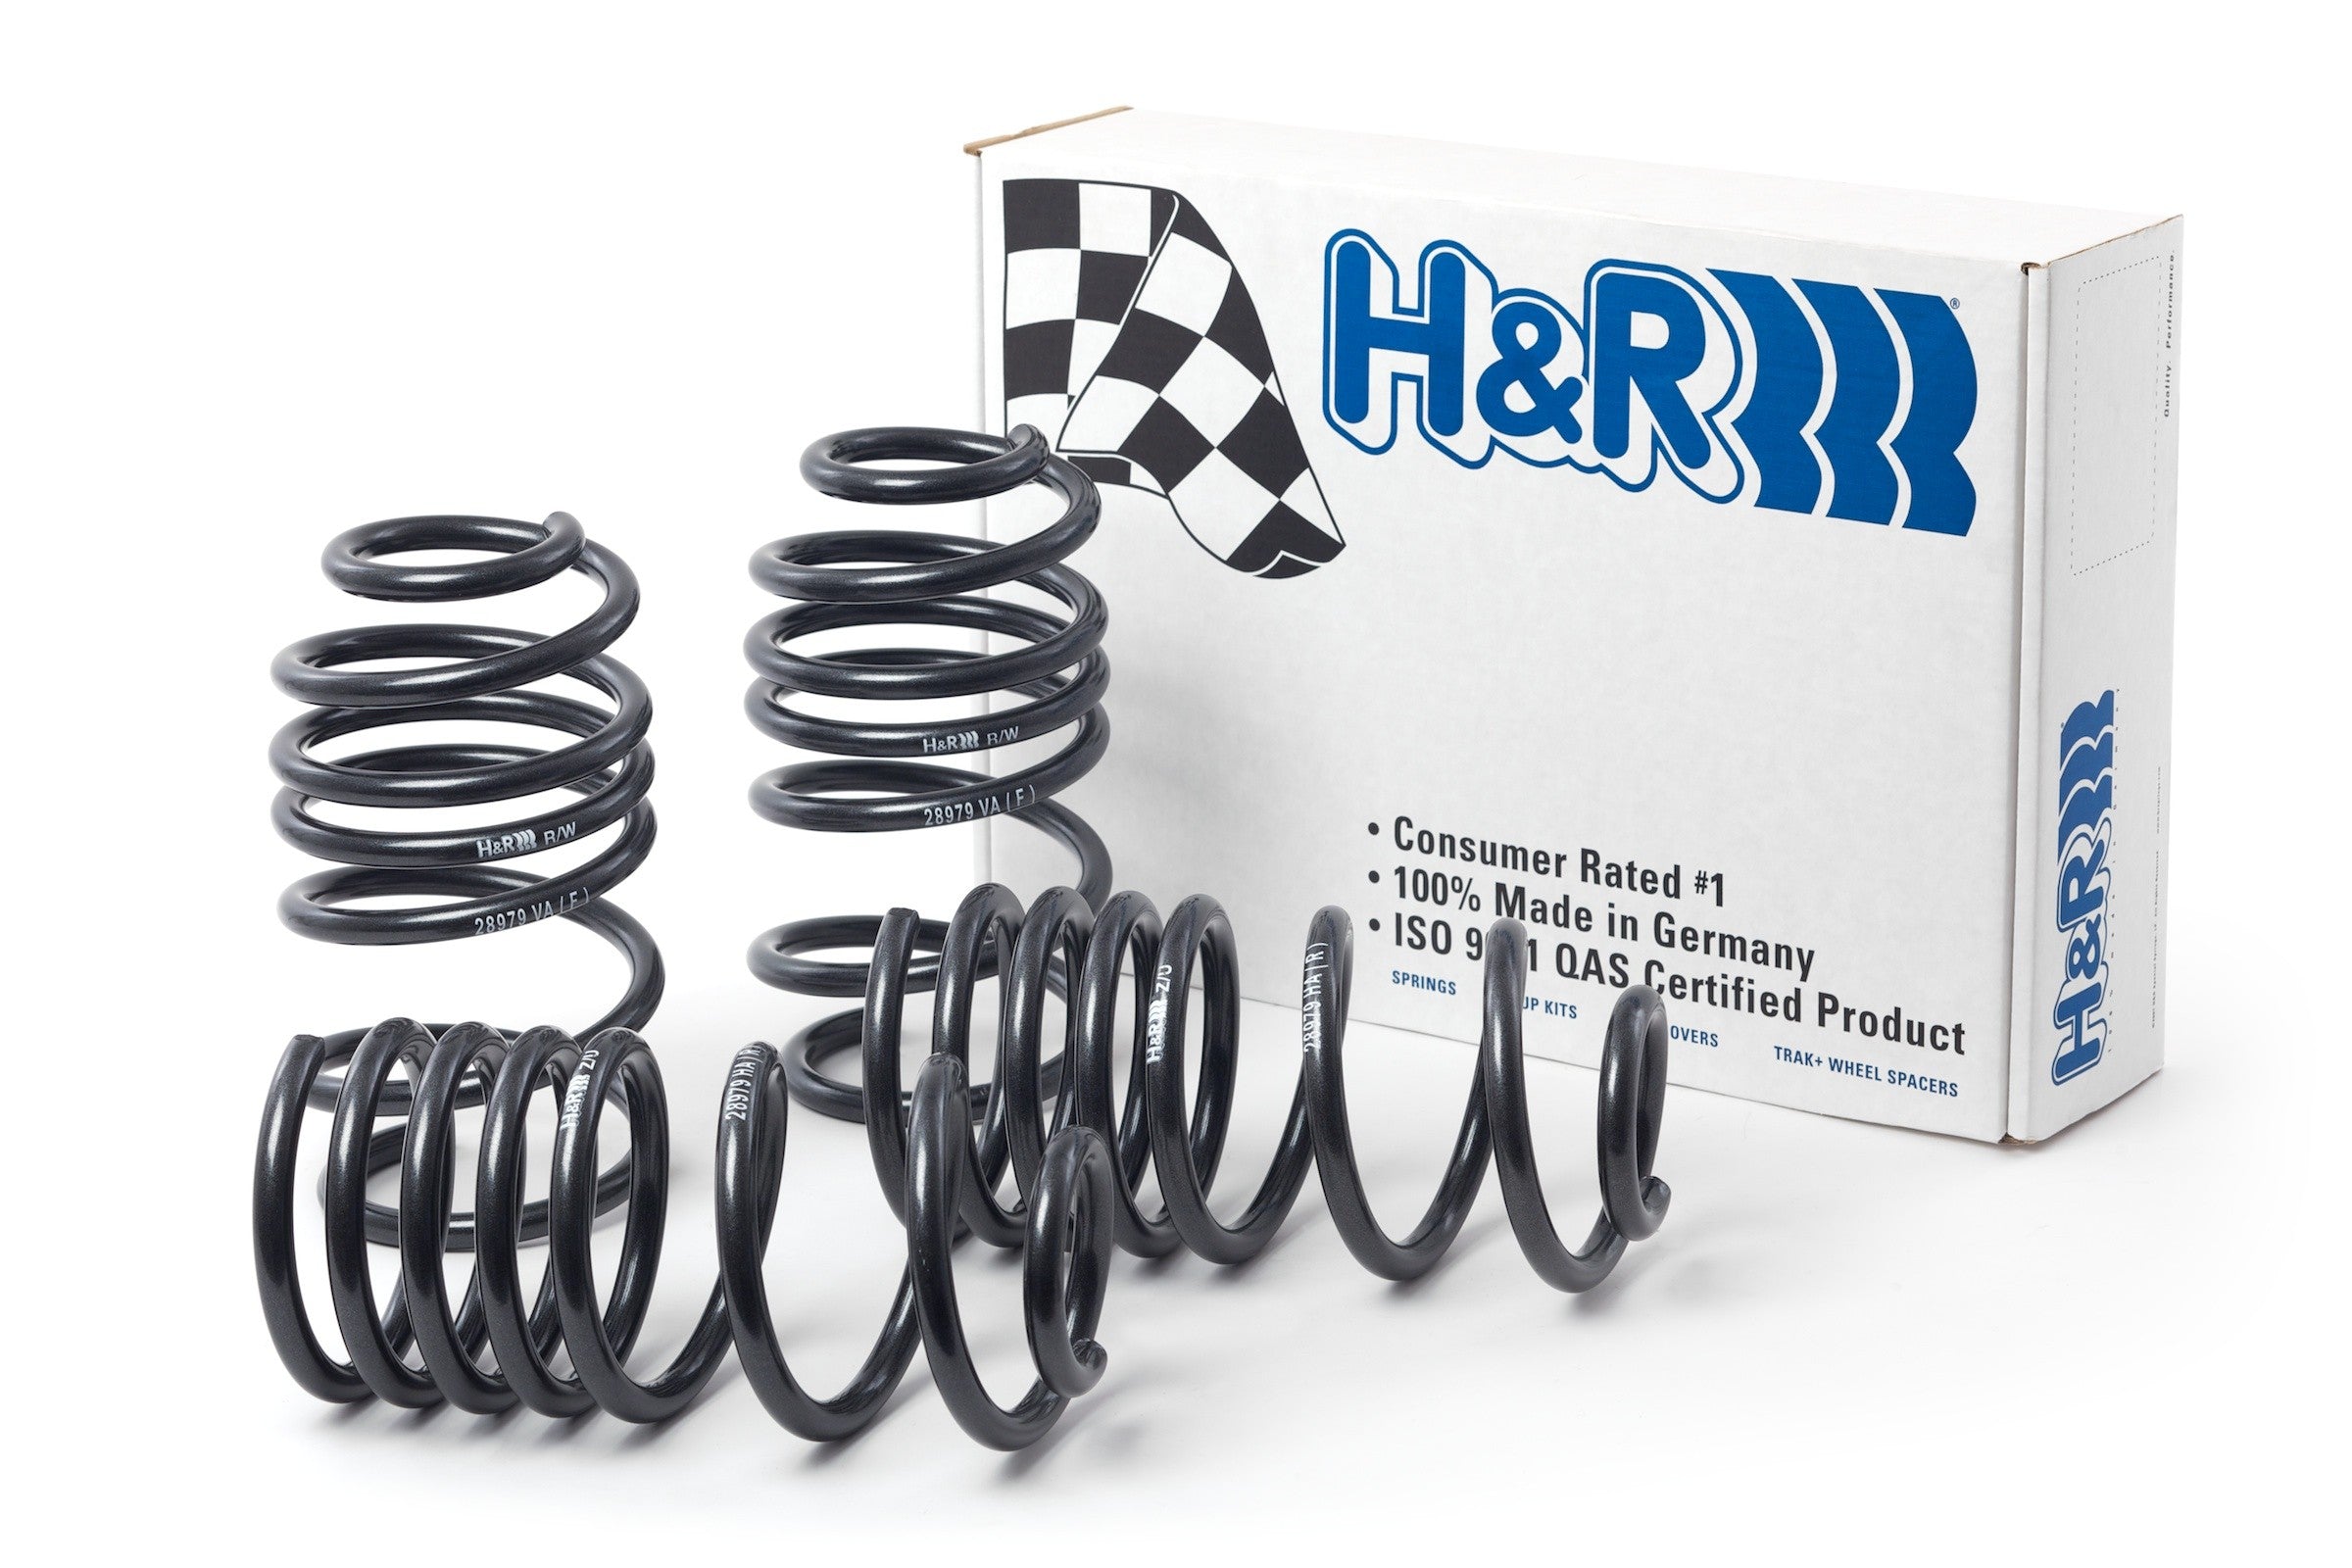 H&R BMW Lowering Sport Springs For 328d/328i/330i xDrive (F31)